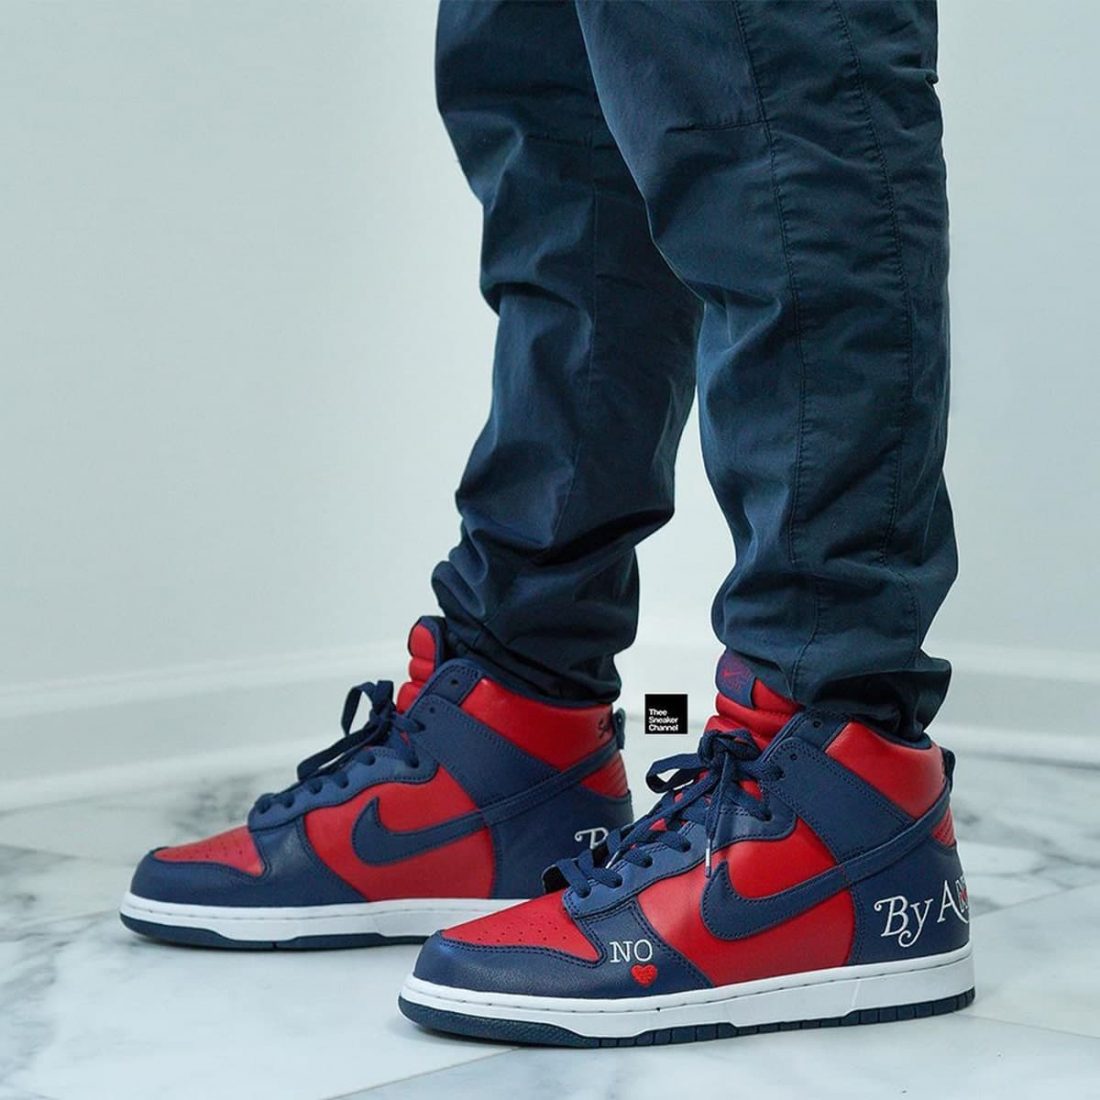 Supreme x Nike SB Dunk High "By Any Means" Navy Red - Le Site de la Sneaker